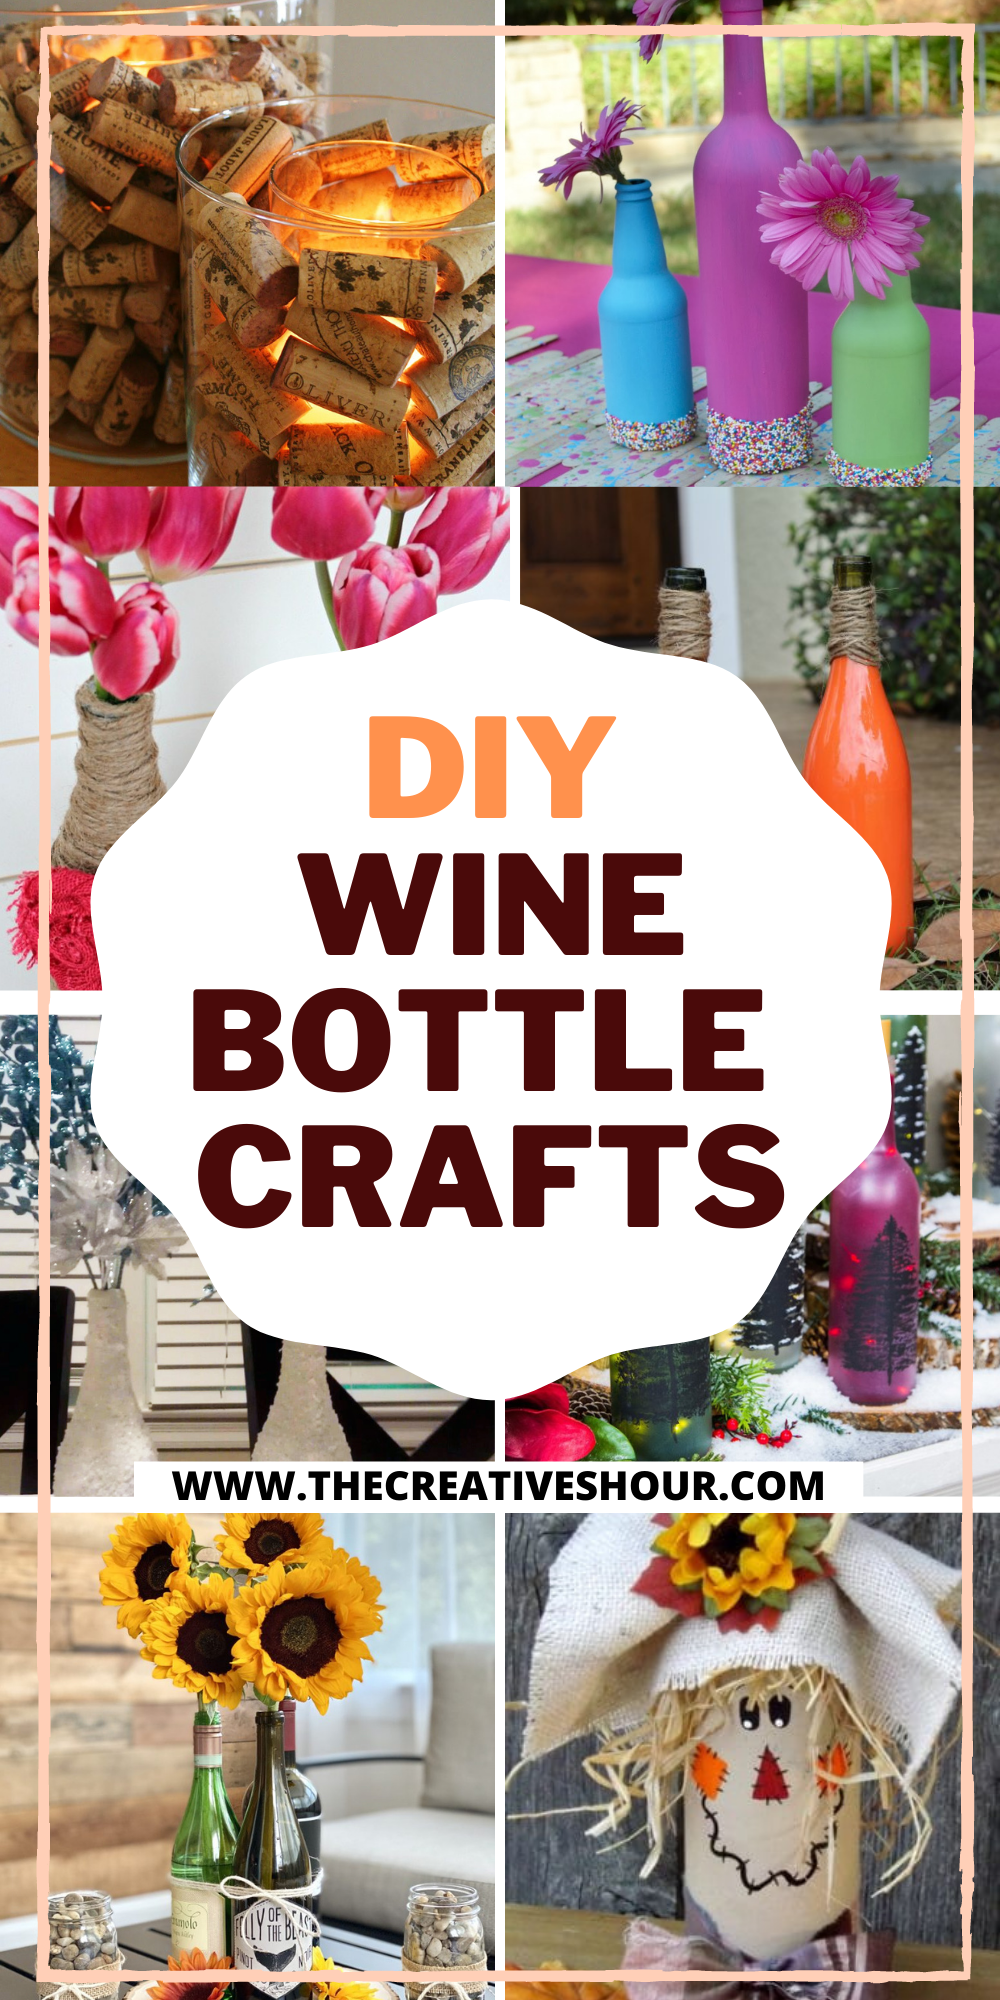 Craft for kids Recycle Plastic Bottles to Decor Items